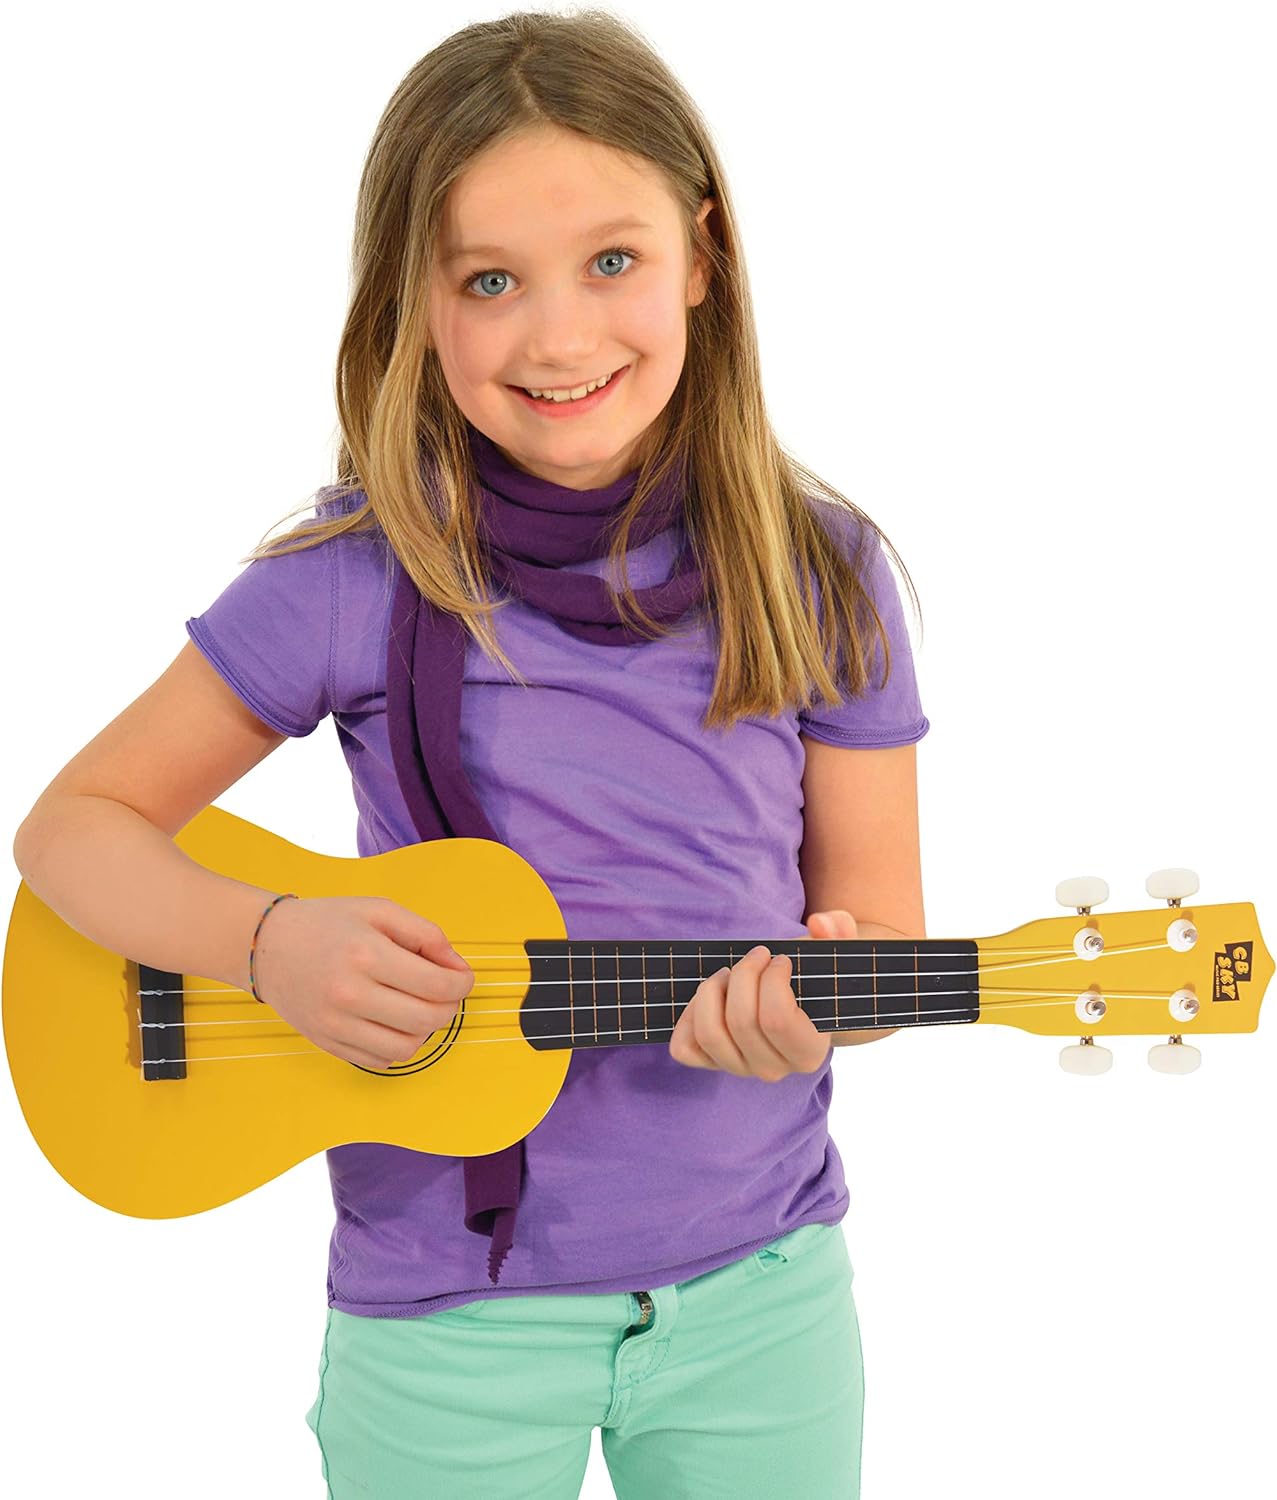 CB SKY Soprano Ukulele 21/53cm for kids, beginners and students (Yellow)